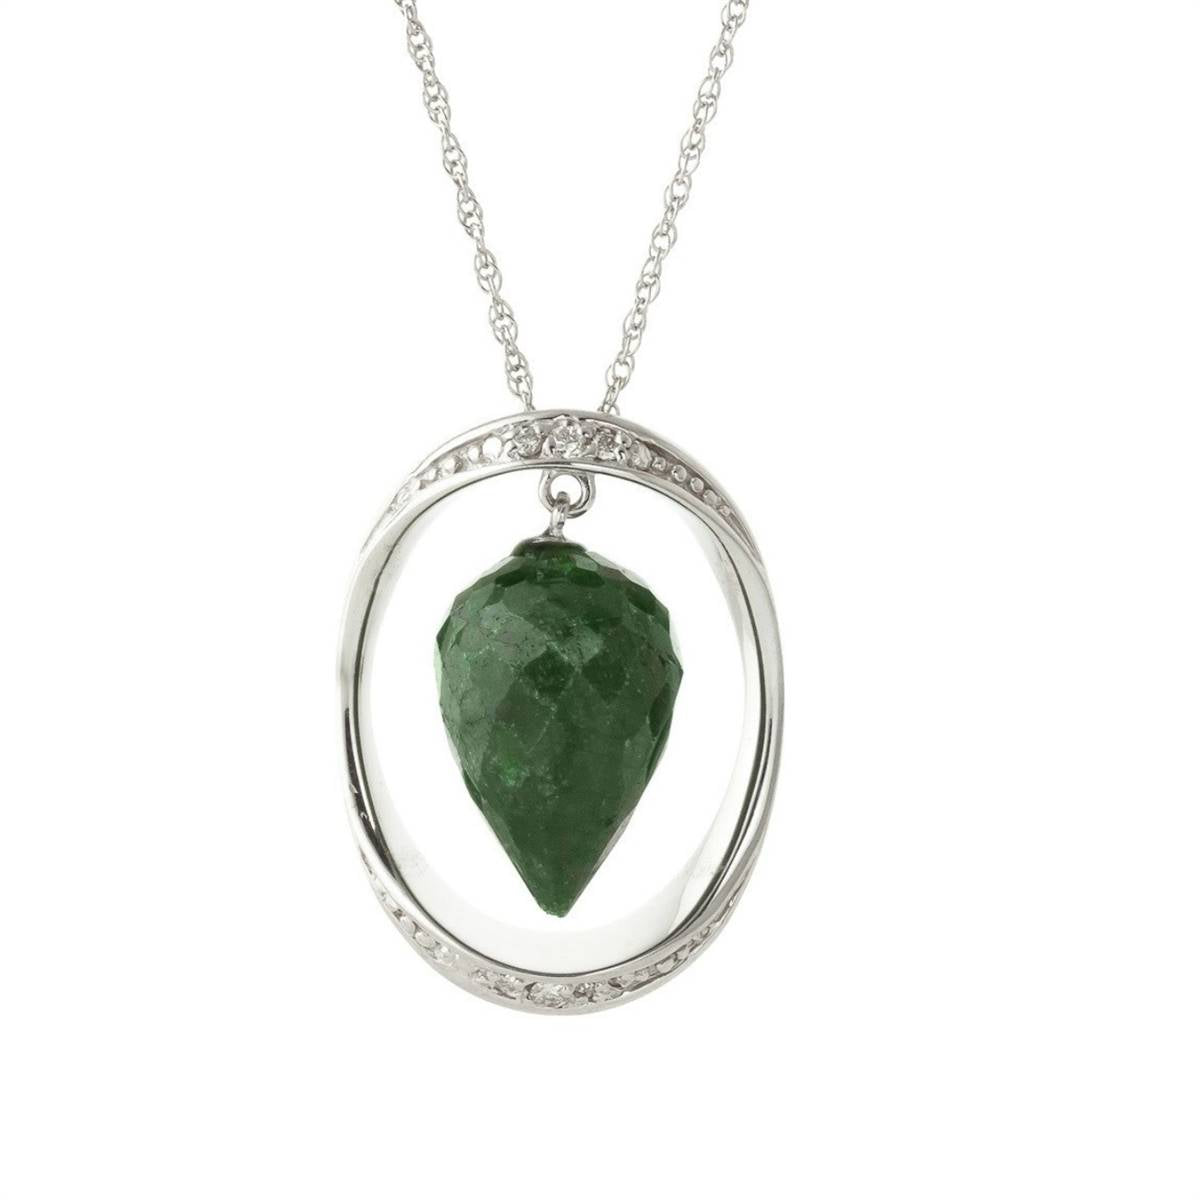 14K Solid White Gold Necklace w/ Diamonds & Briolette Pointy Drop Dyed Green Sapphire